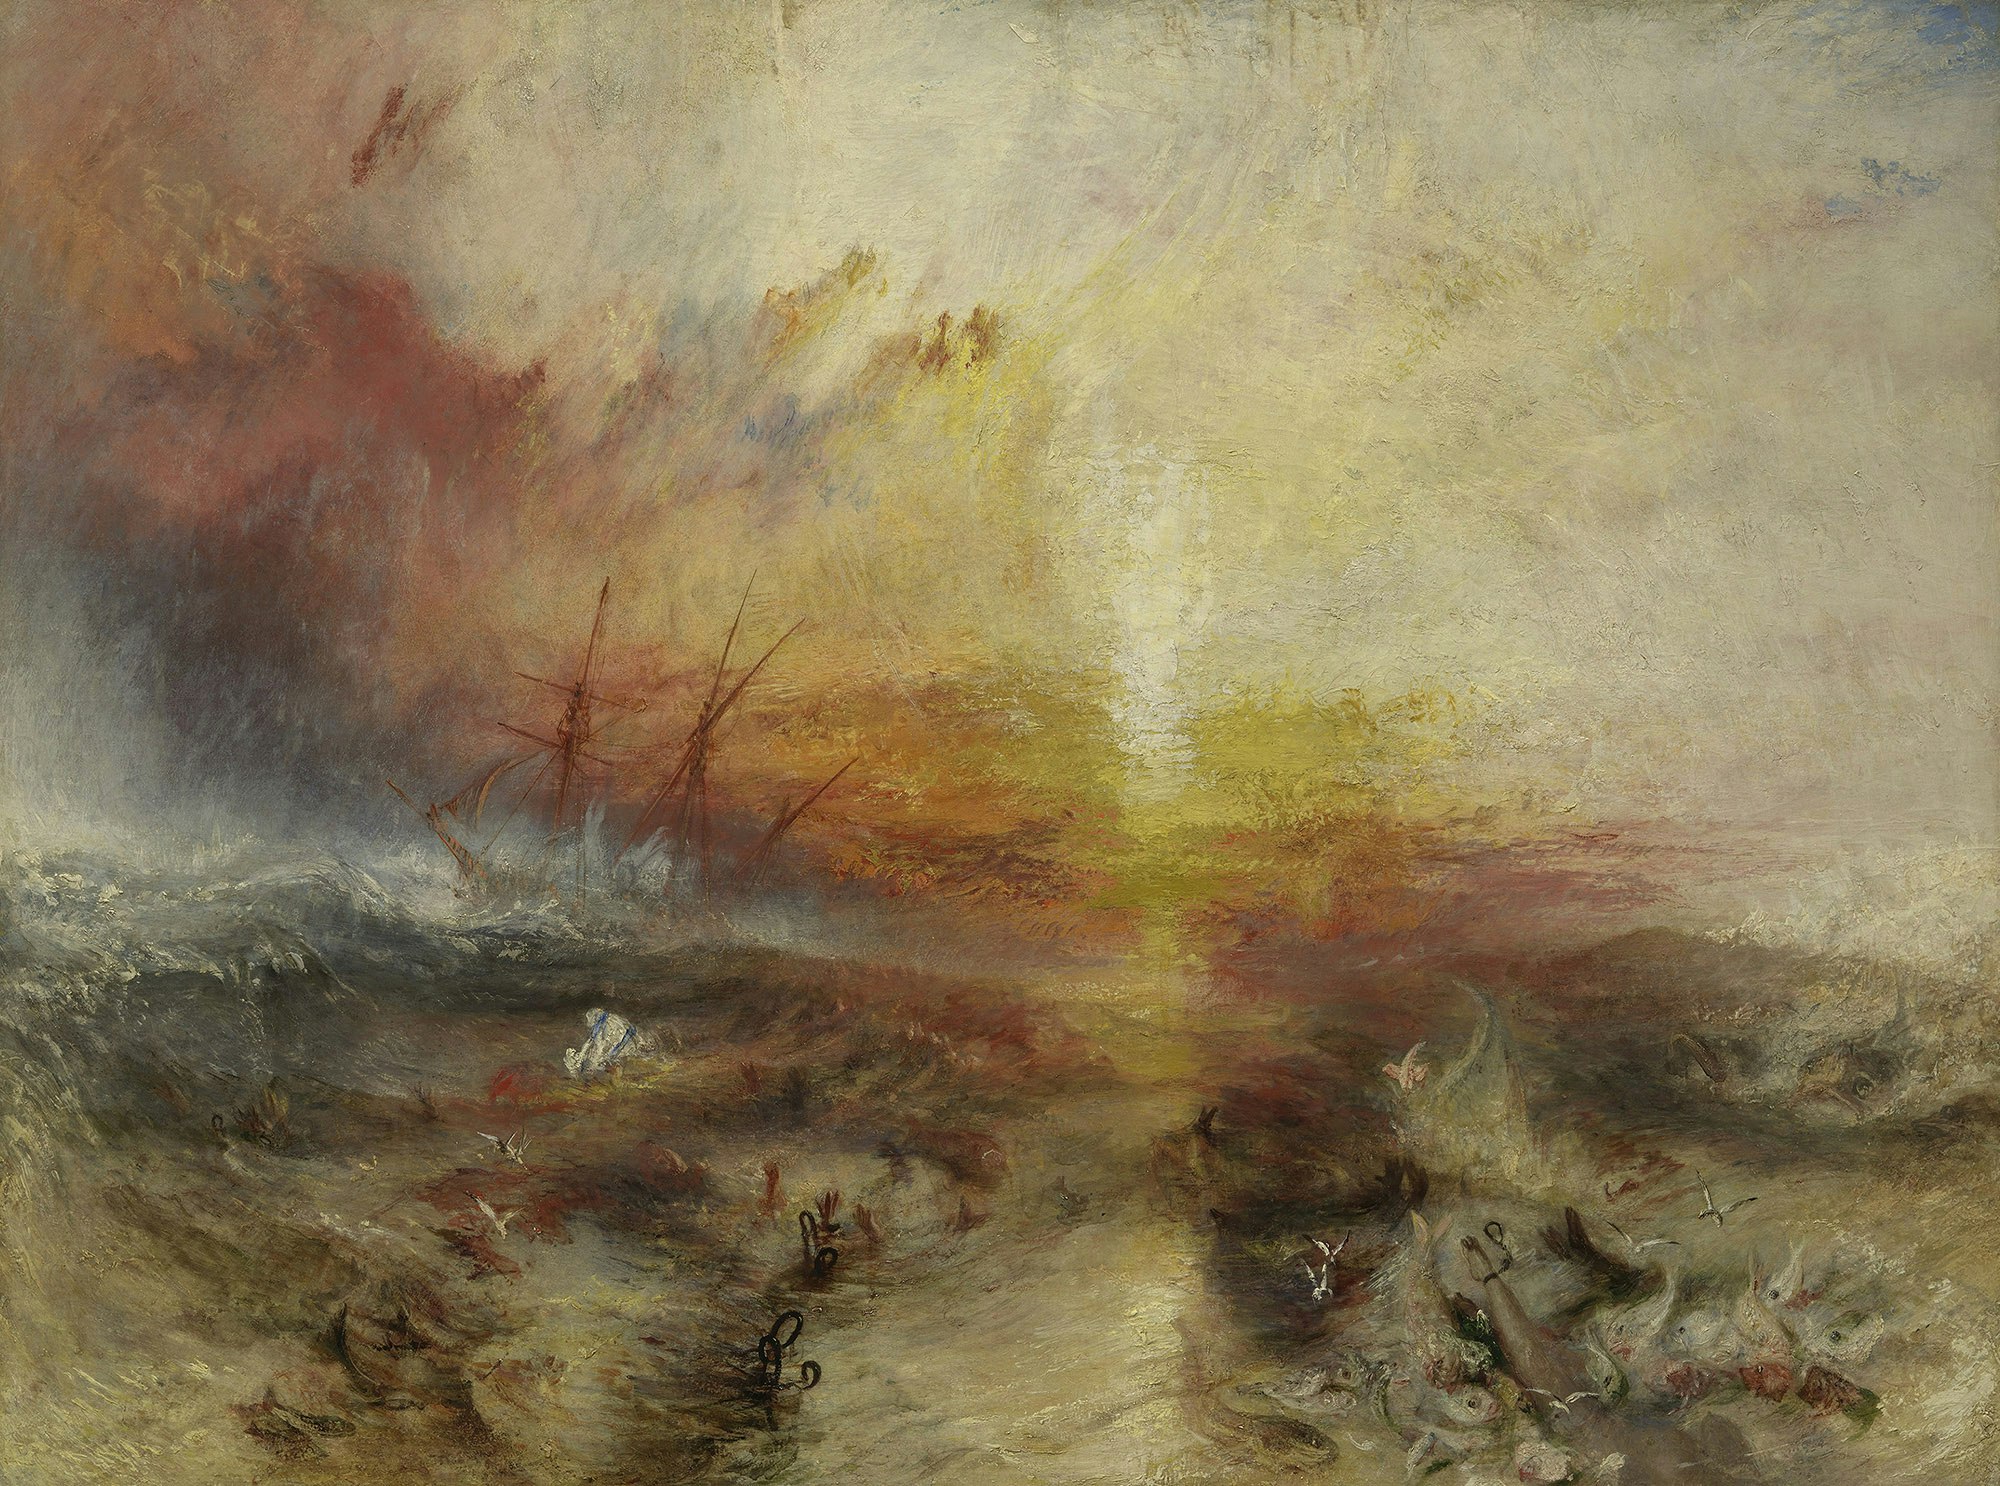 Joseph Mallord William Turner, <em>Slave Ship (Slavers Throwing Overboard the Dead and Dying, Typhoon Coming On)</em>, 1840. Oil on canvas, 35 3/4 x 48 1/4 inches. Museum of Fine Arts, Boston. Photo © Museum of Fine Arts, Boston.